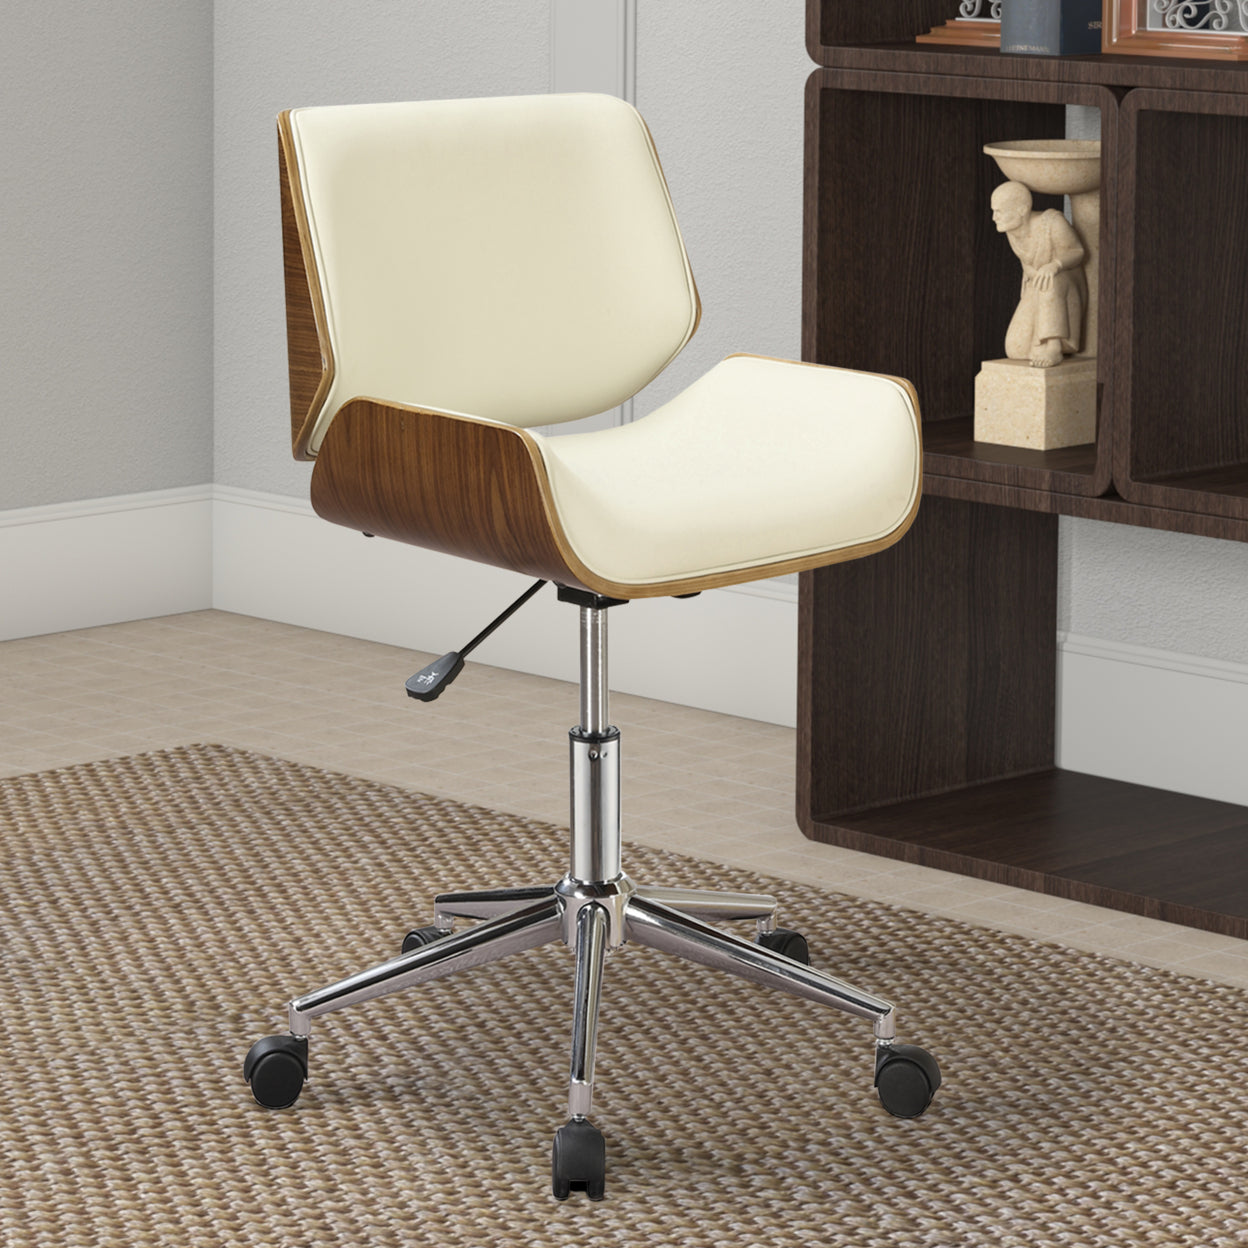 Adjustable Height Office Chair Ecru and Chrome